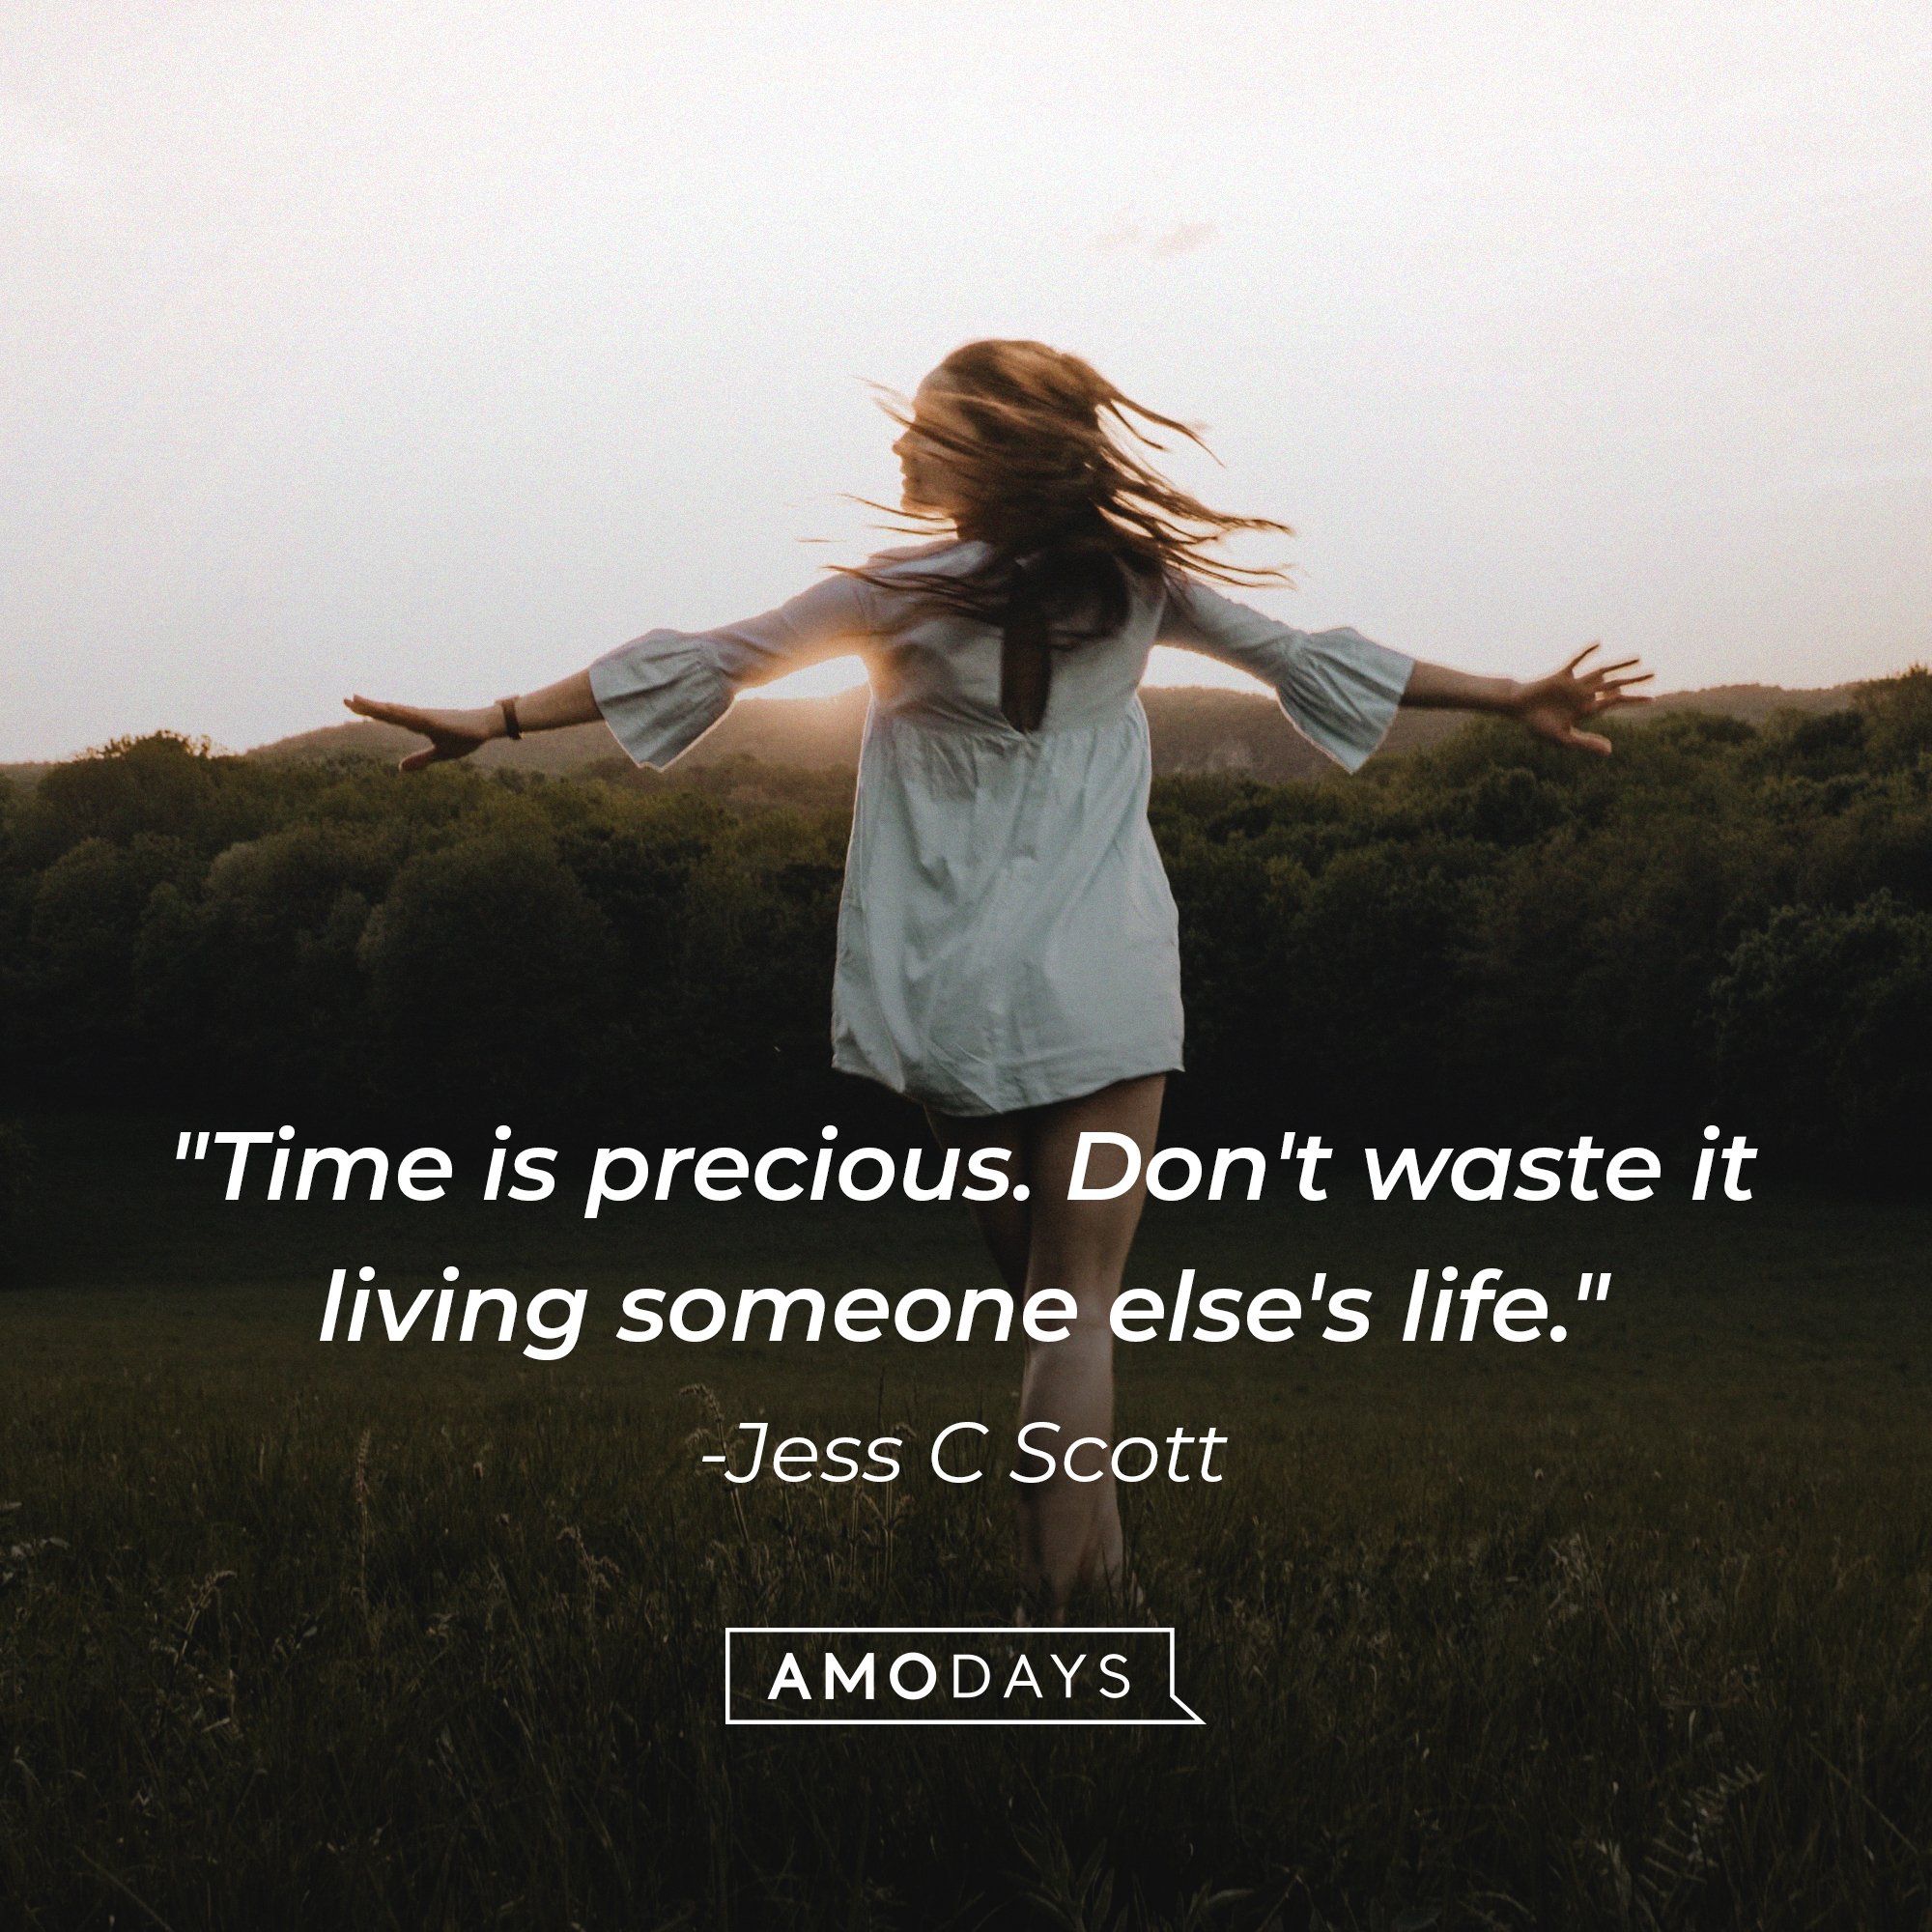 Jess C Scott’s quote: "Time is precious. Don't waste it living someone else's life." | Image: AmoDays